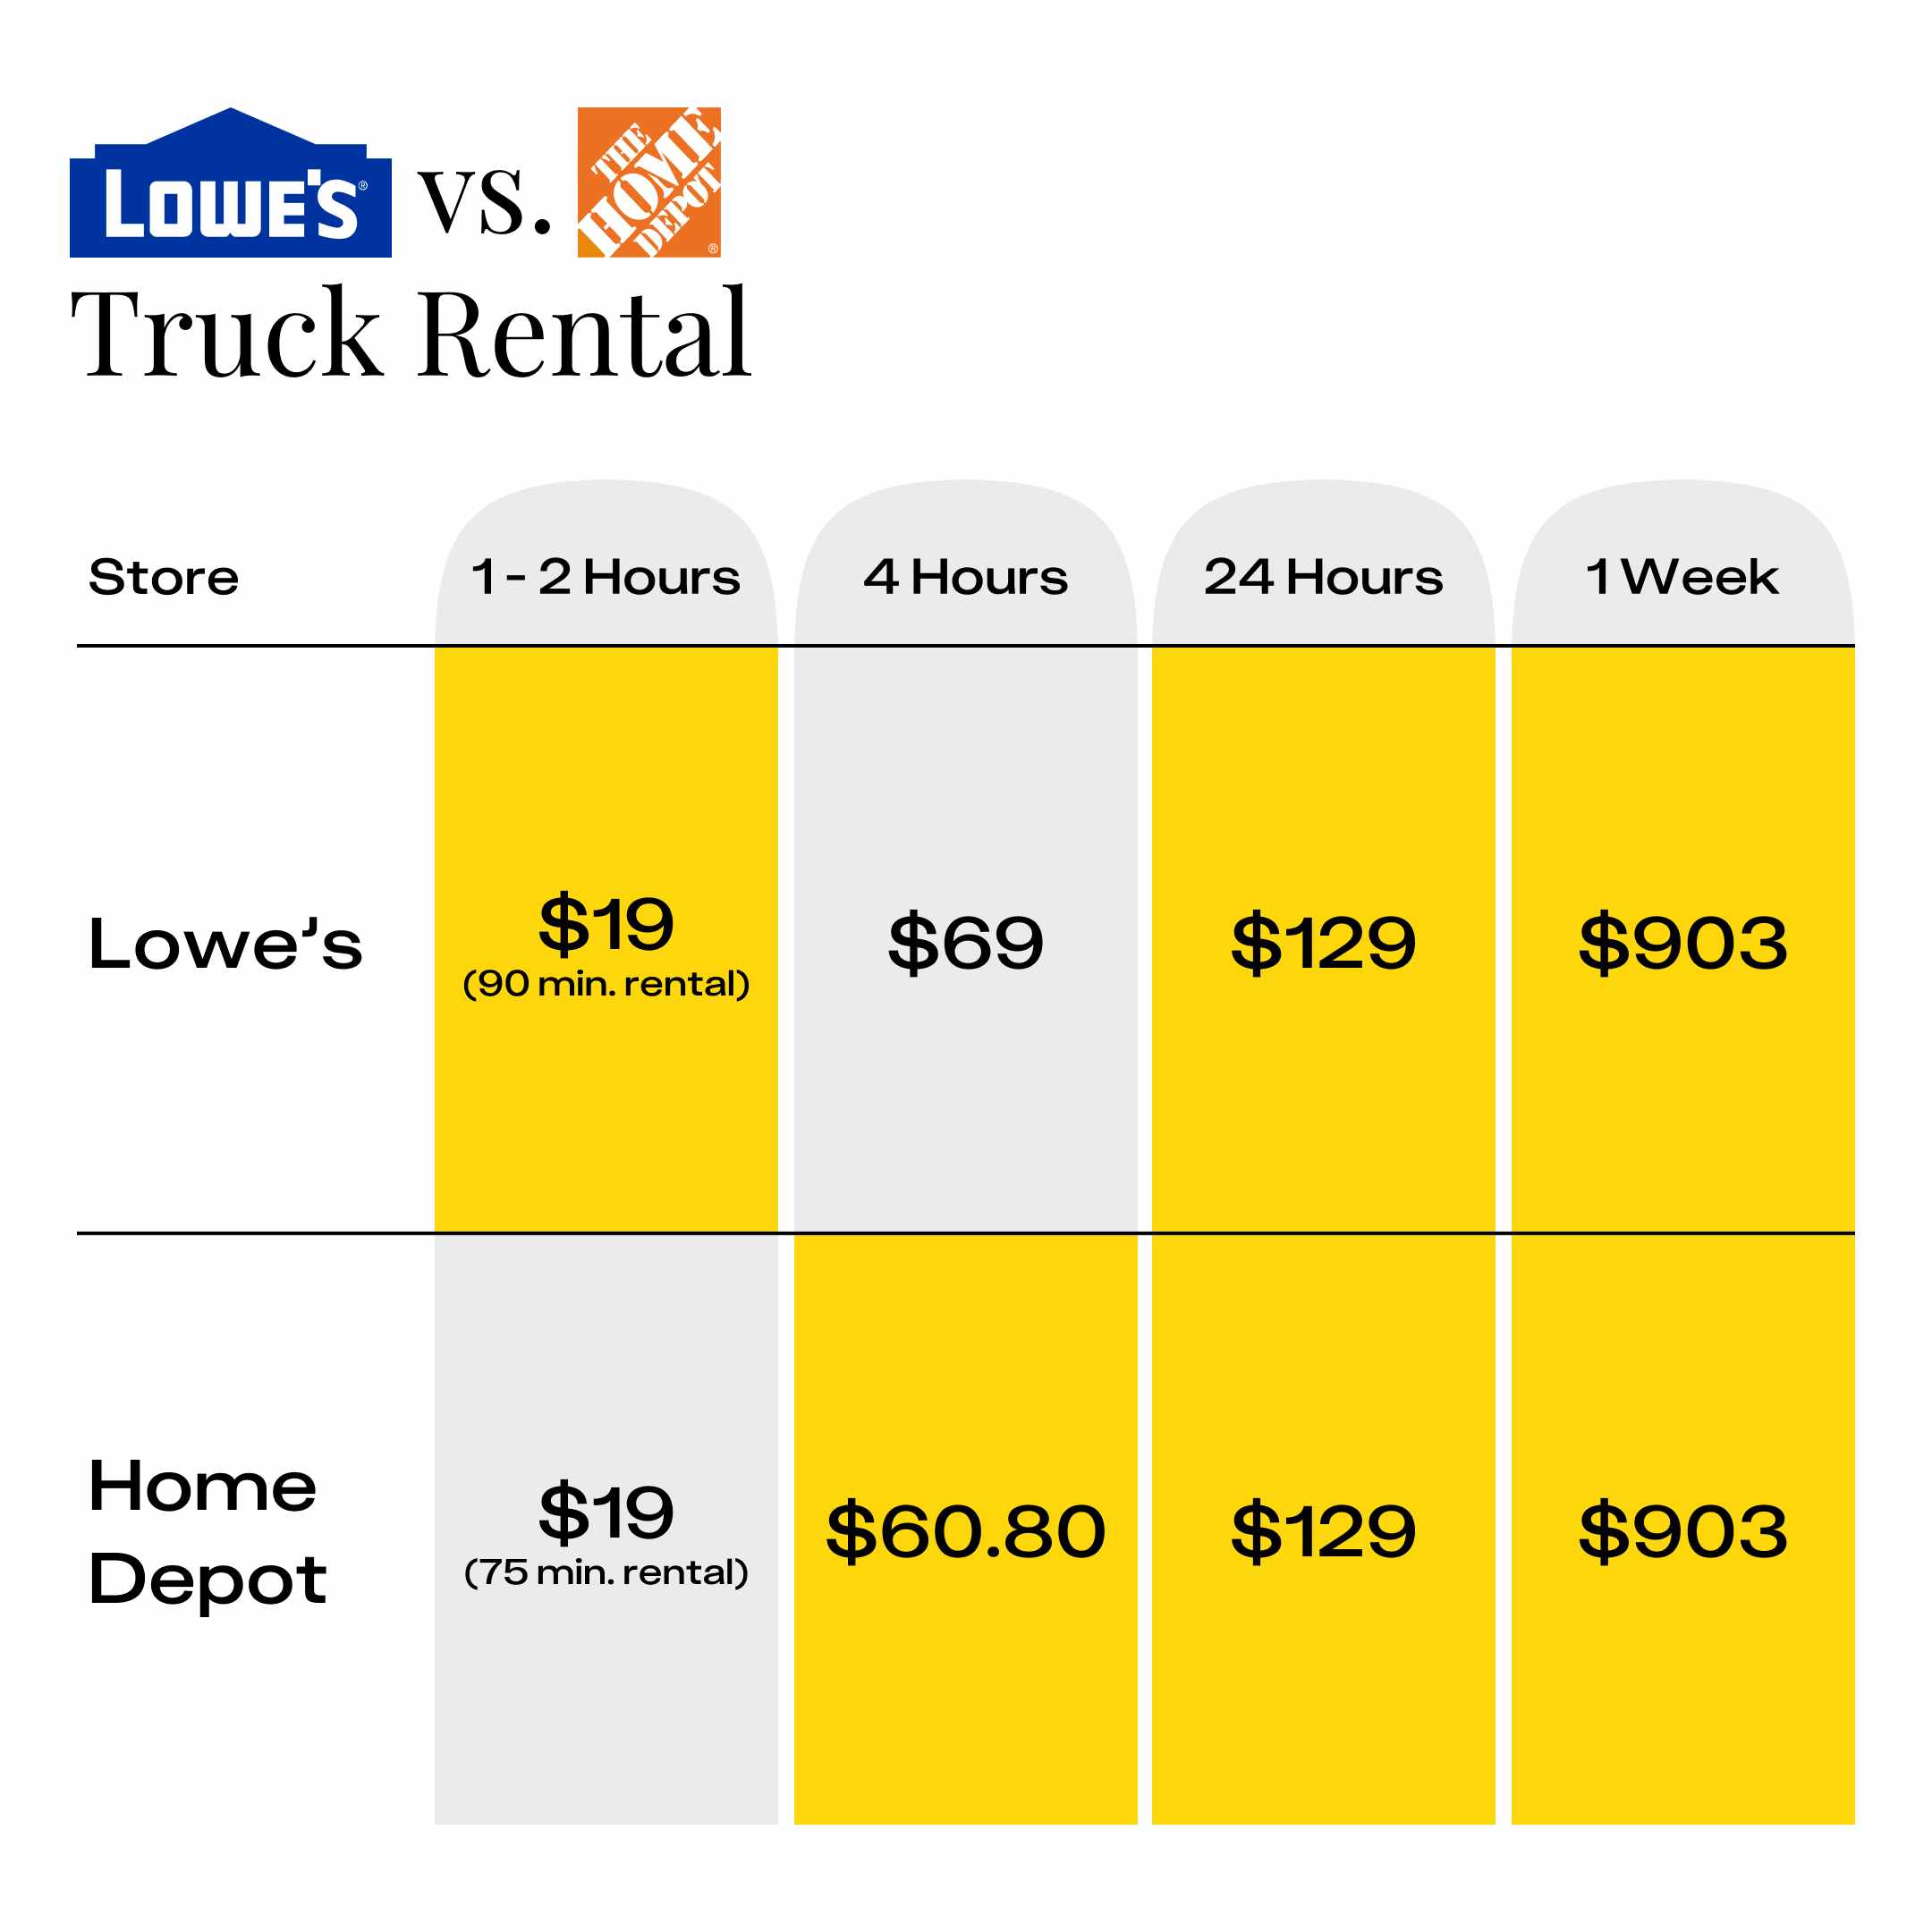 A comparison of Lowe's vs. Home Depot truck rental prices